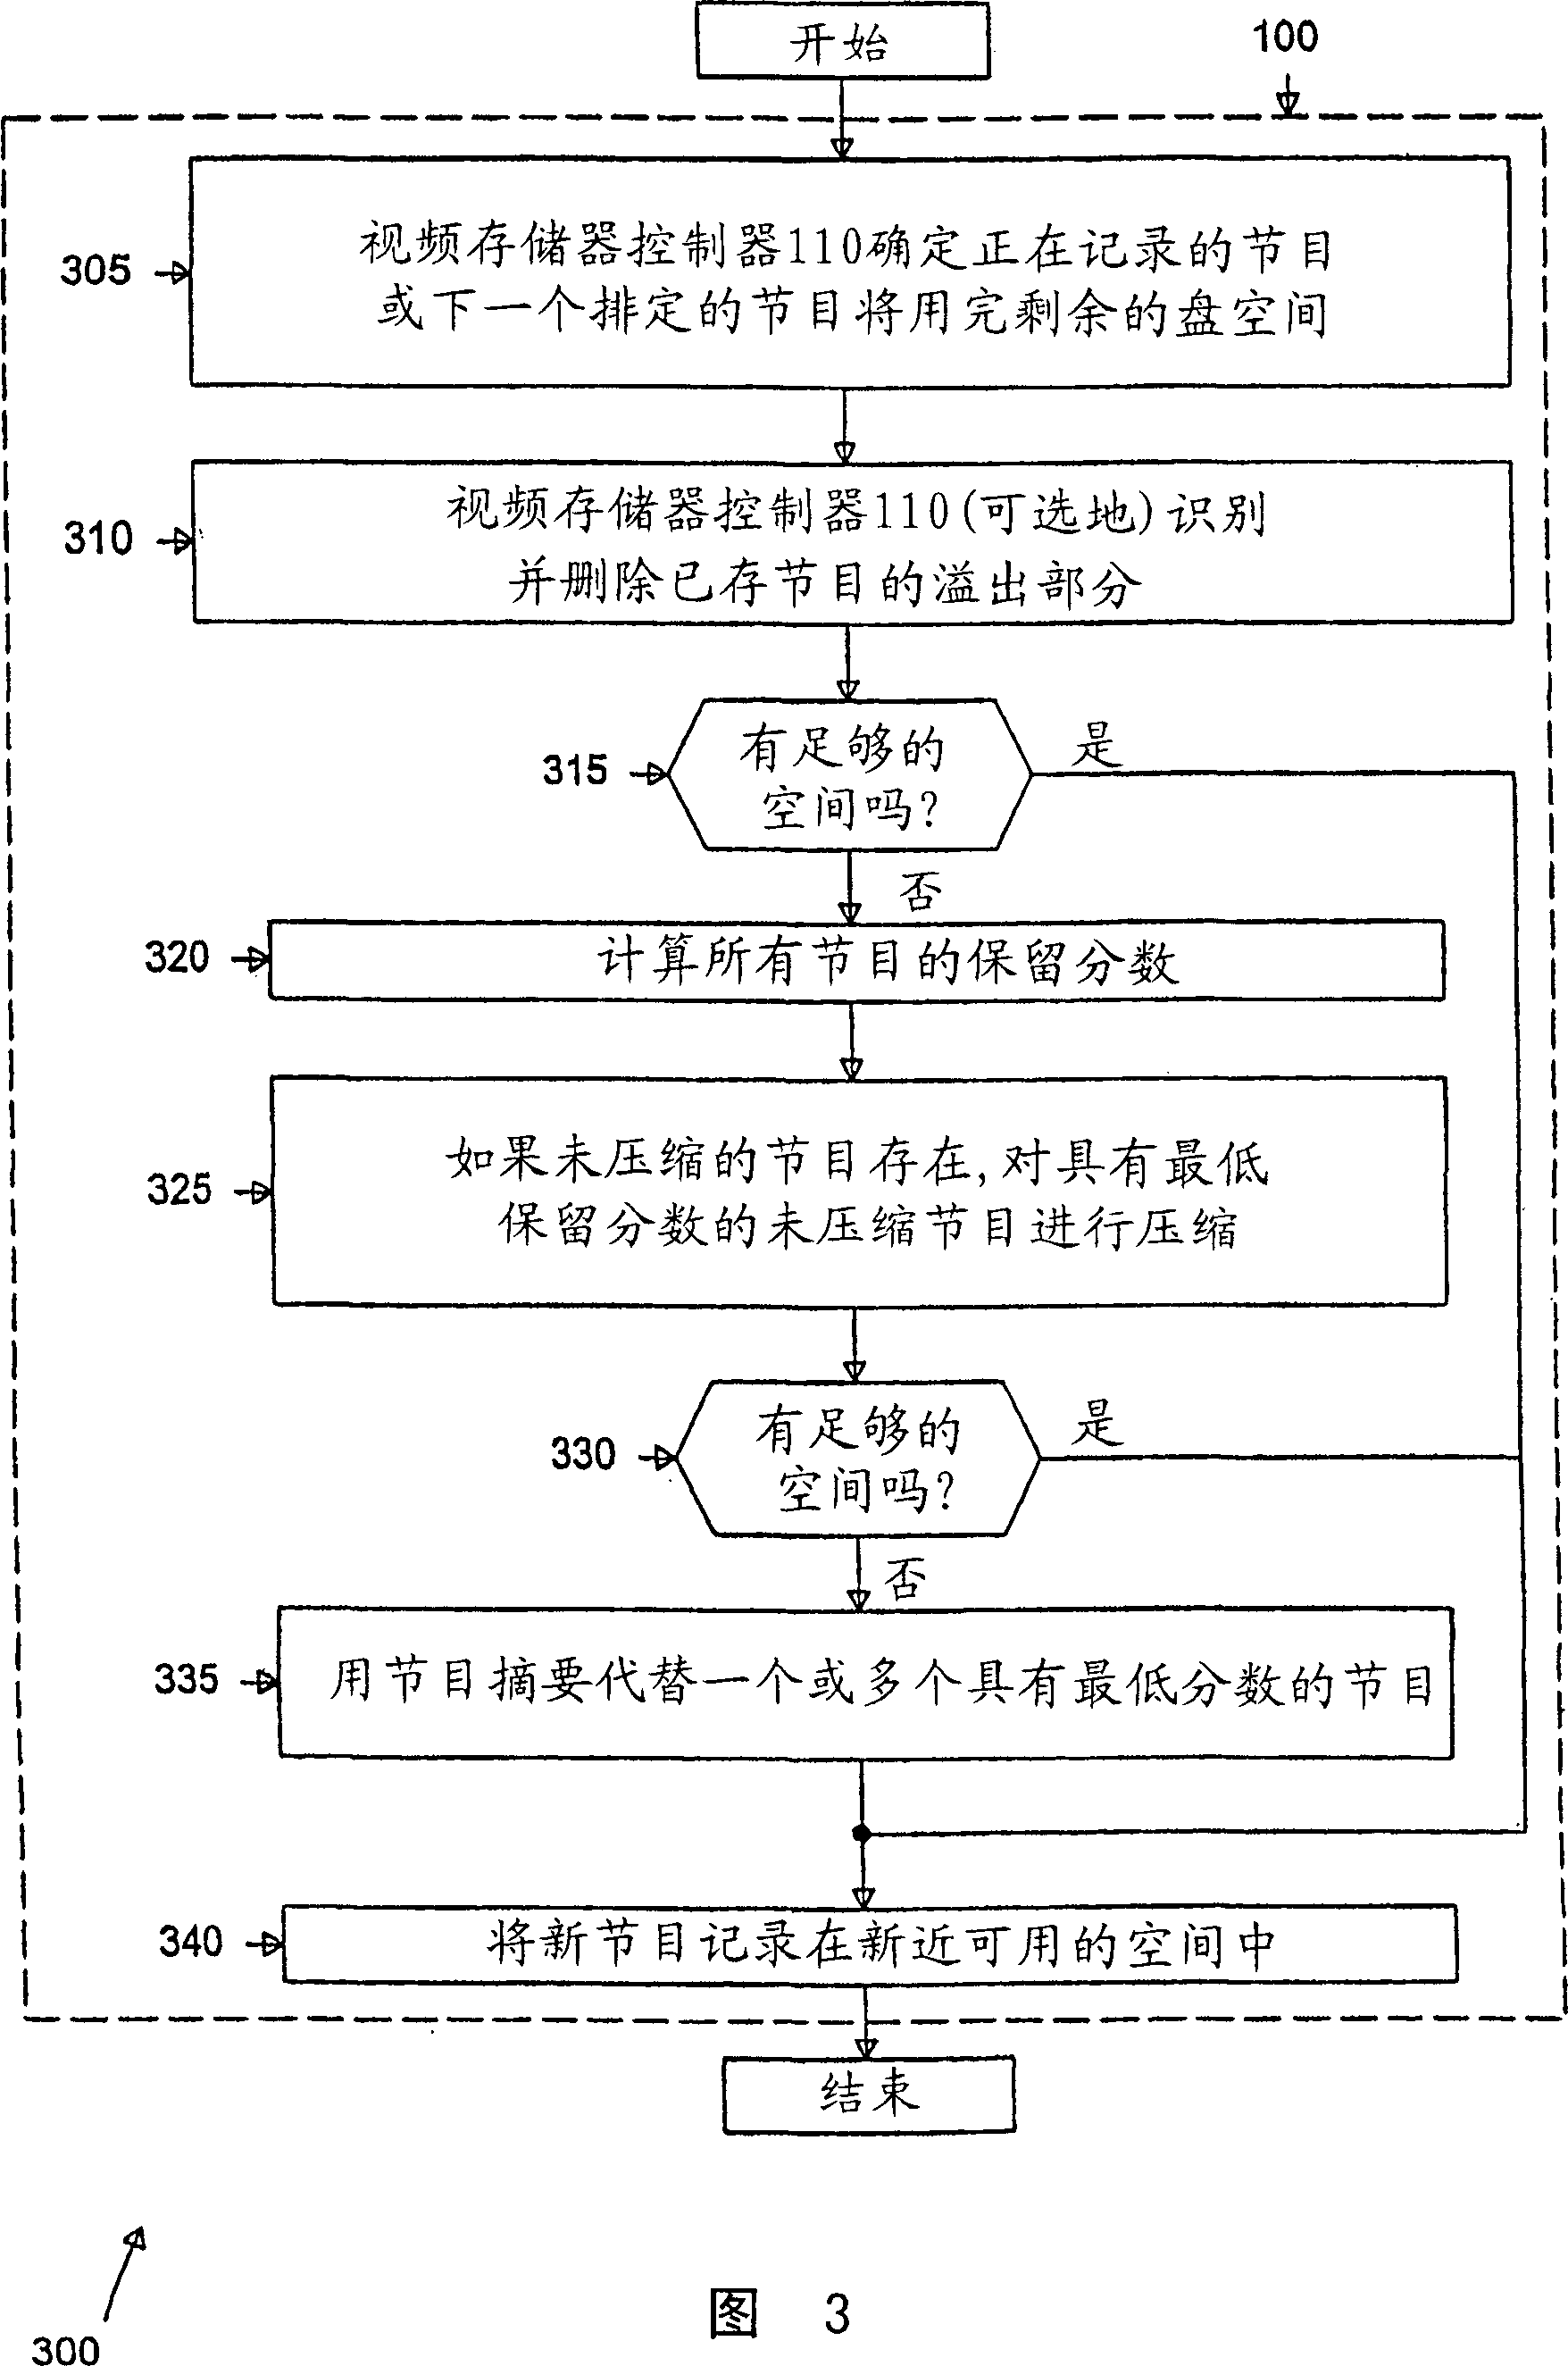 Video memory manager for use in video recorder and method of operation